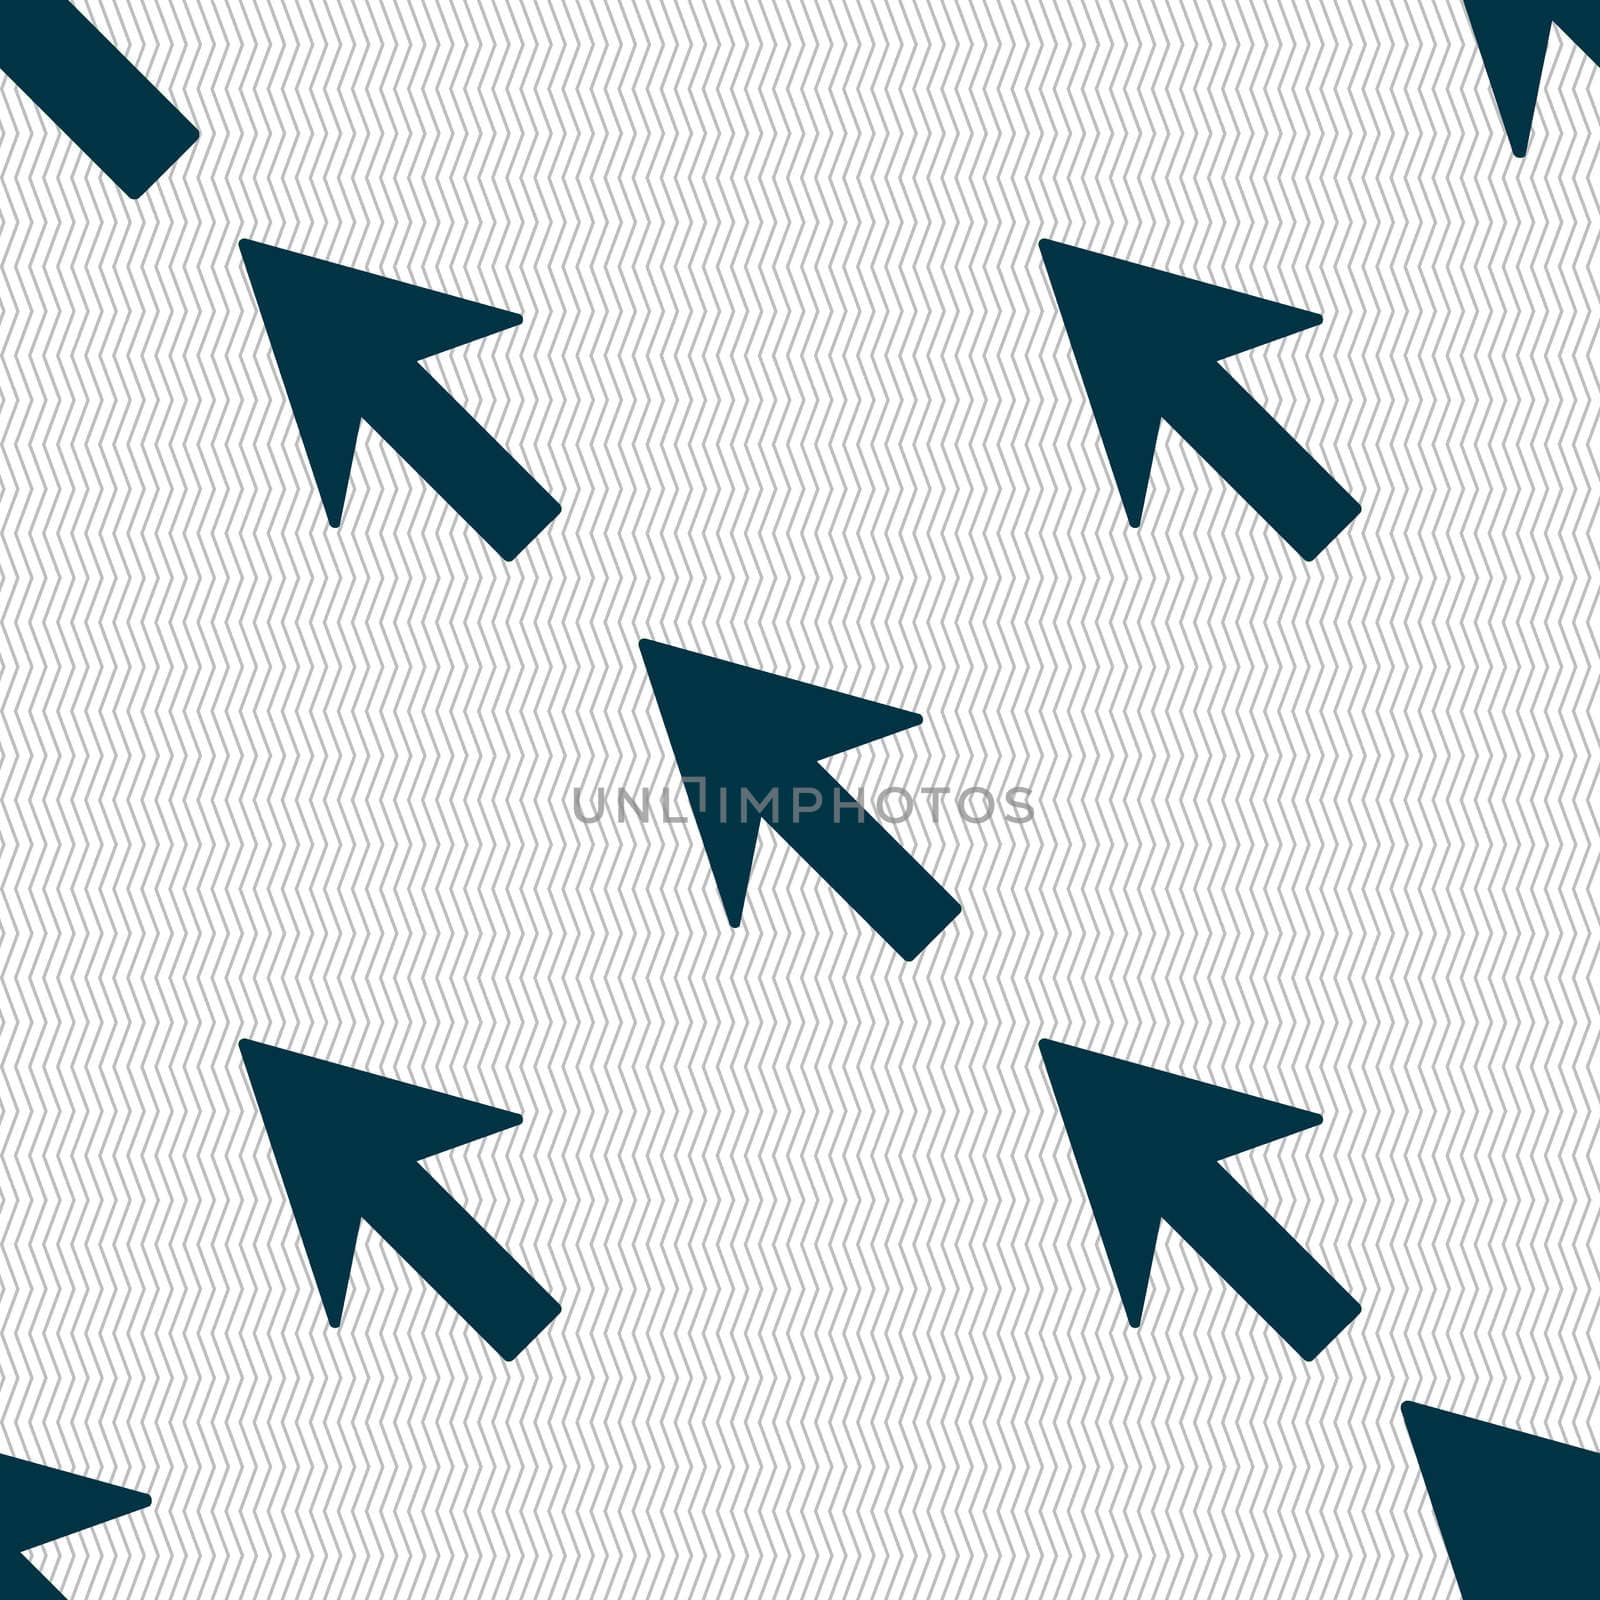 Cursor, arrow icon sign. Seamless abstract background with geometric shapes. illustration